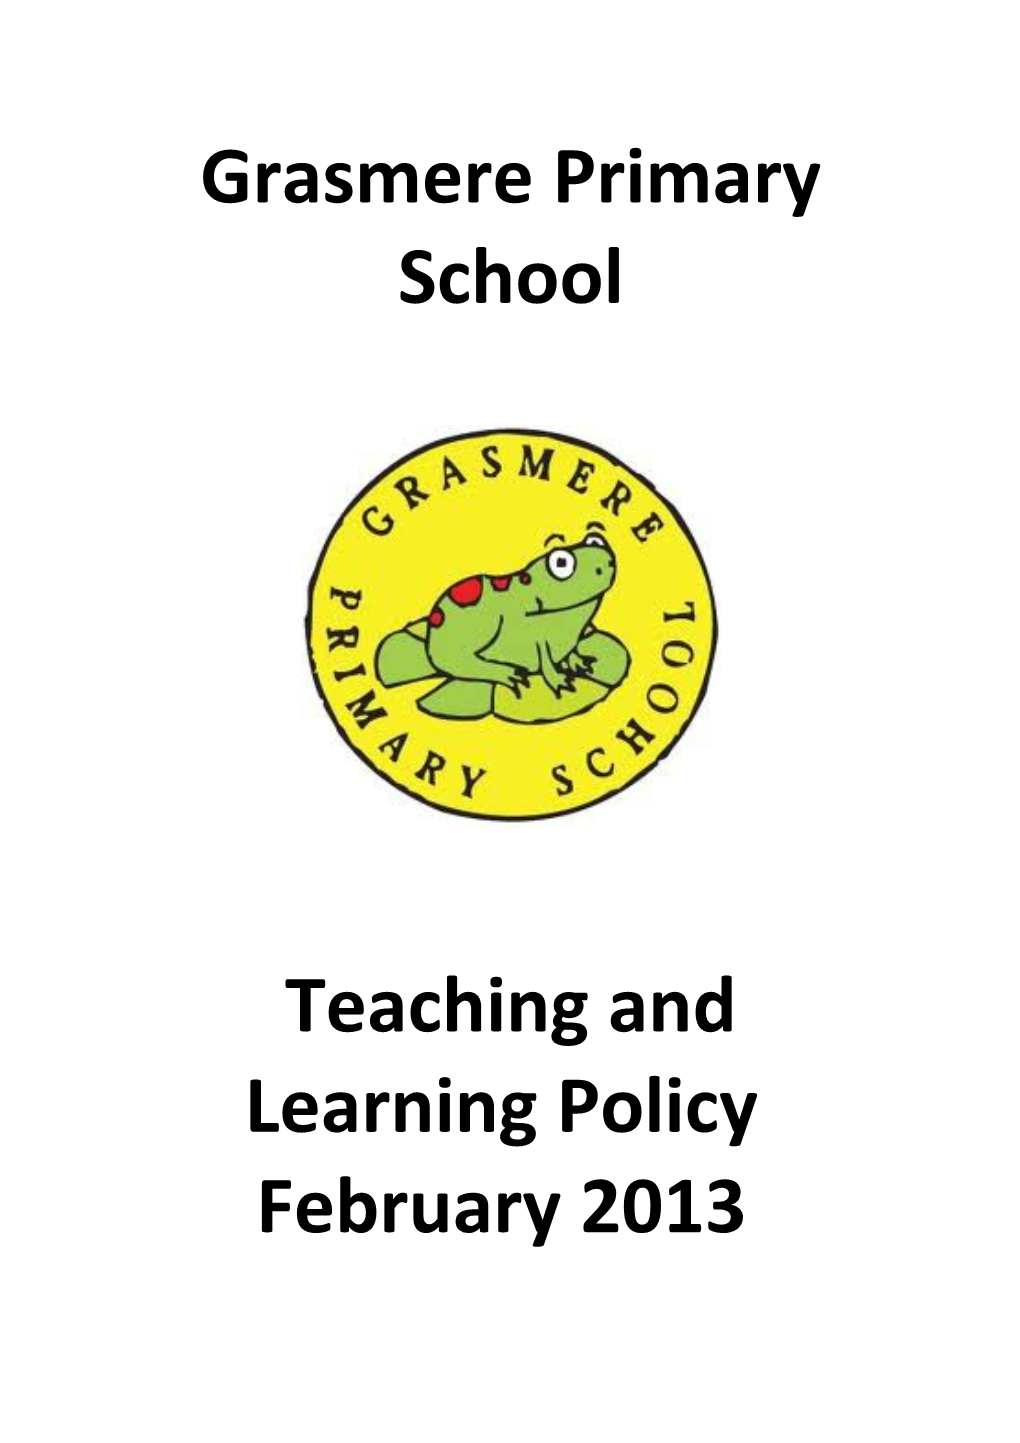 Grasmere Primary School Teaching and Learning Policy